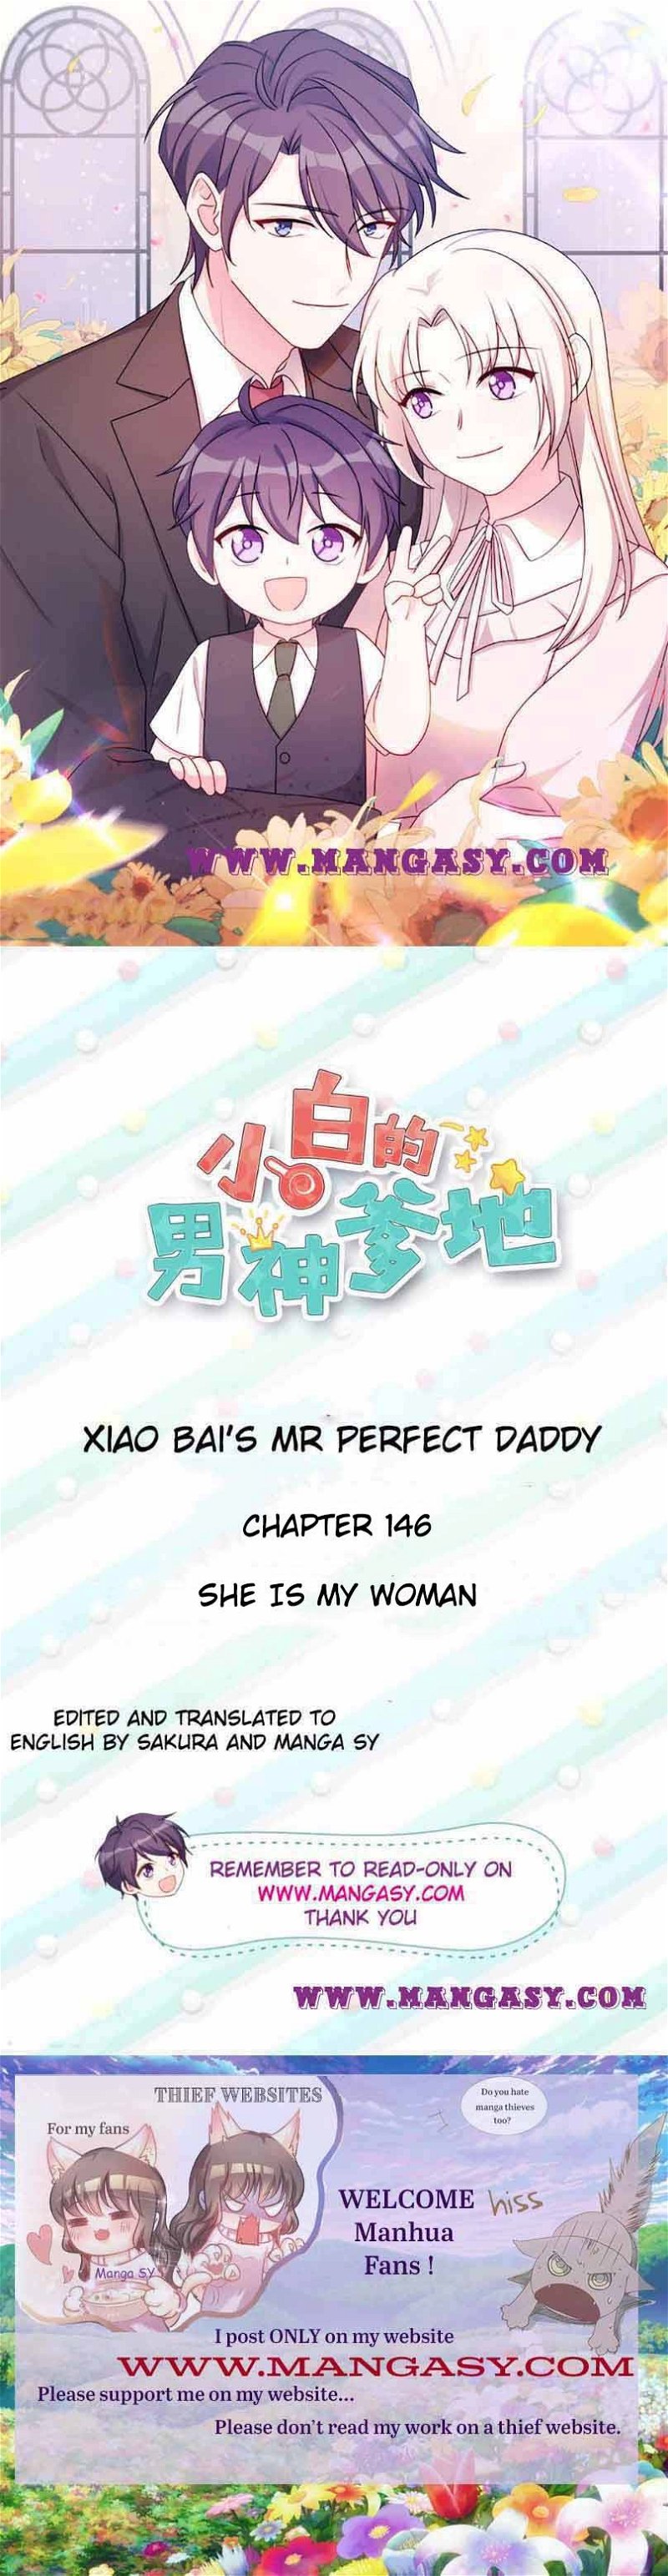 Xiao Bai’s father is a wonderful person Chapter 146 - Page 0